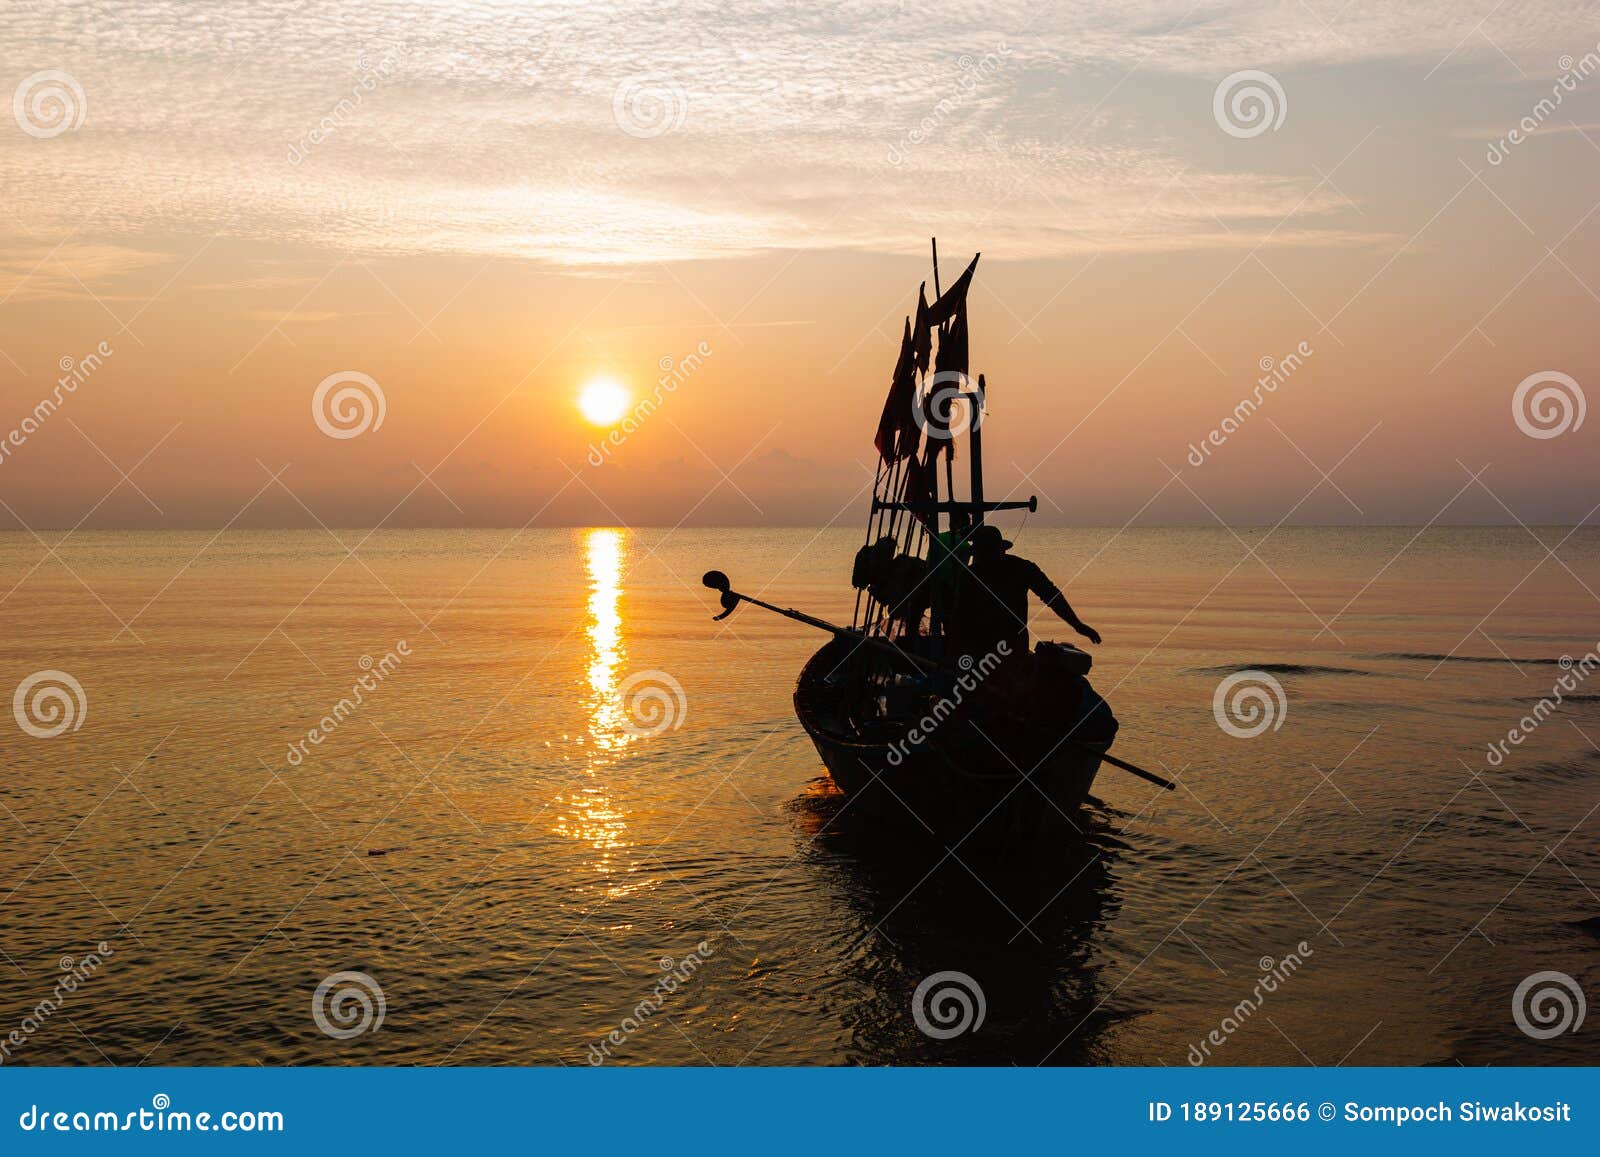 Silhouette of Two People on a Fishing Boat. Stock Photo - Image of